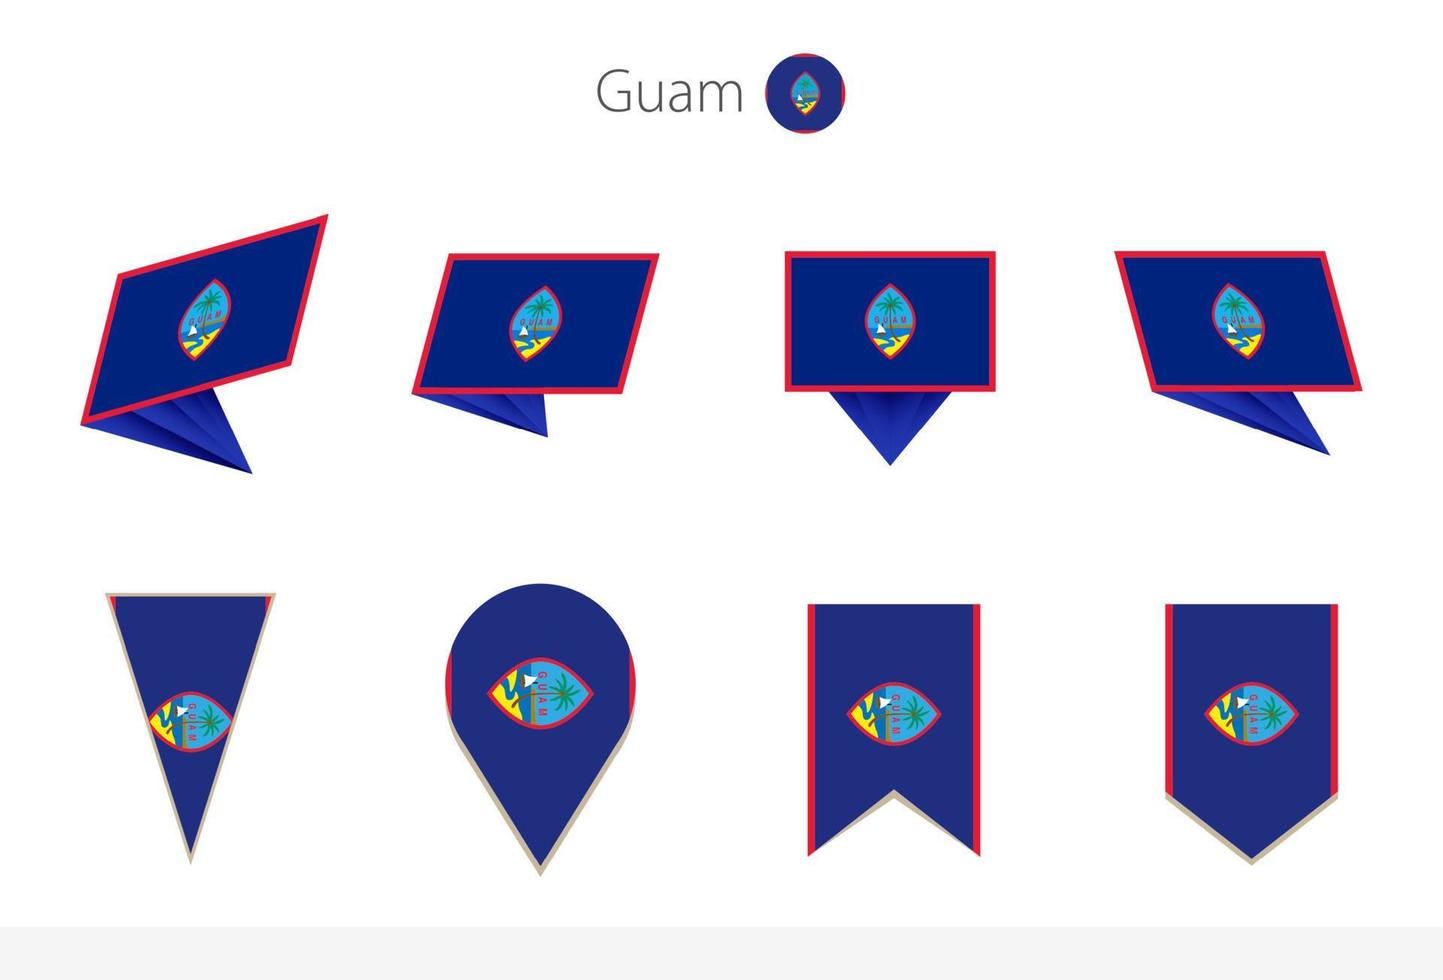 Guam national flag collection, eight versions of Guam vector flags.